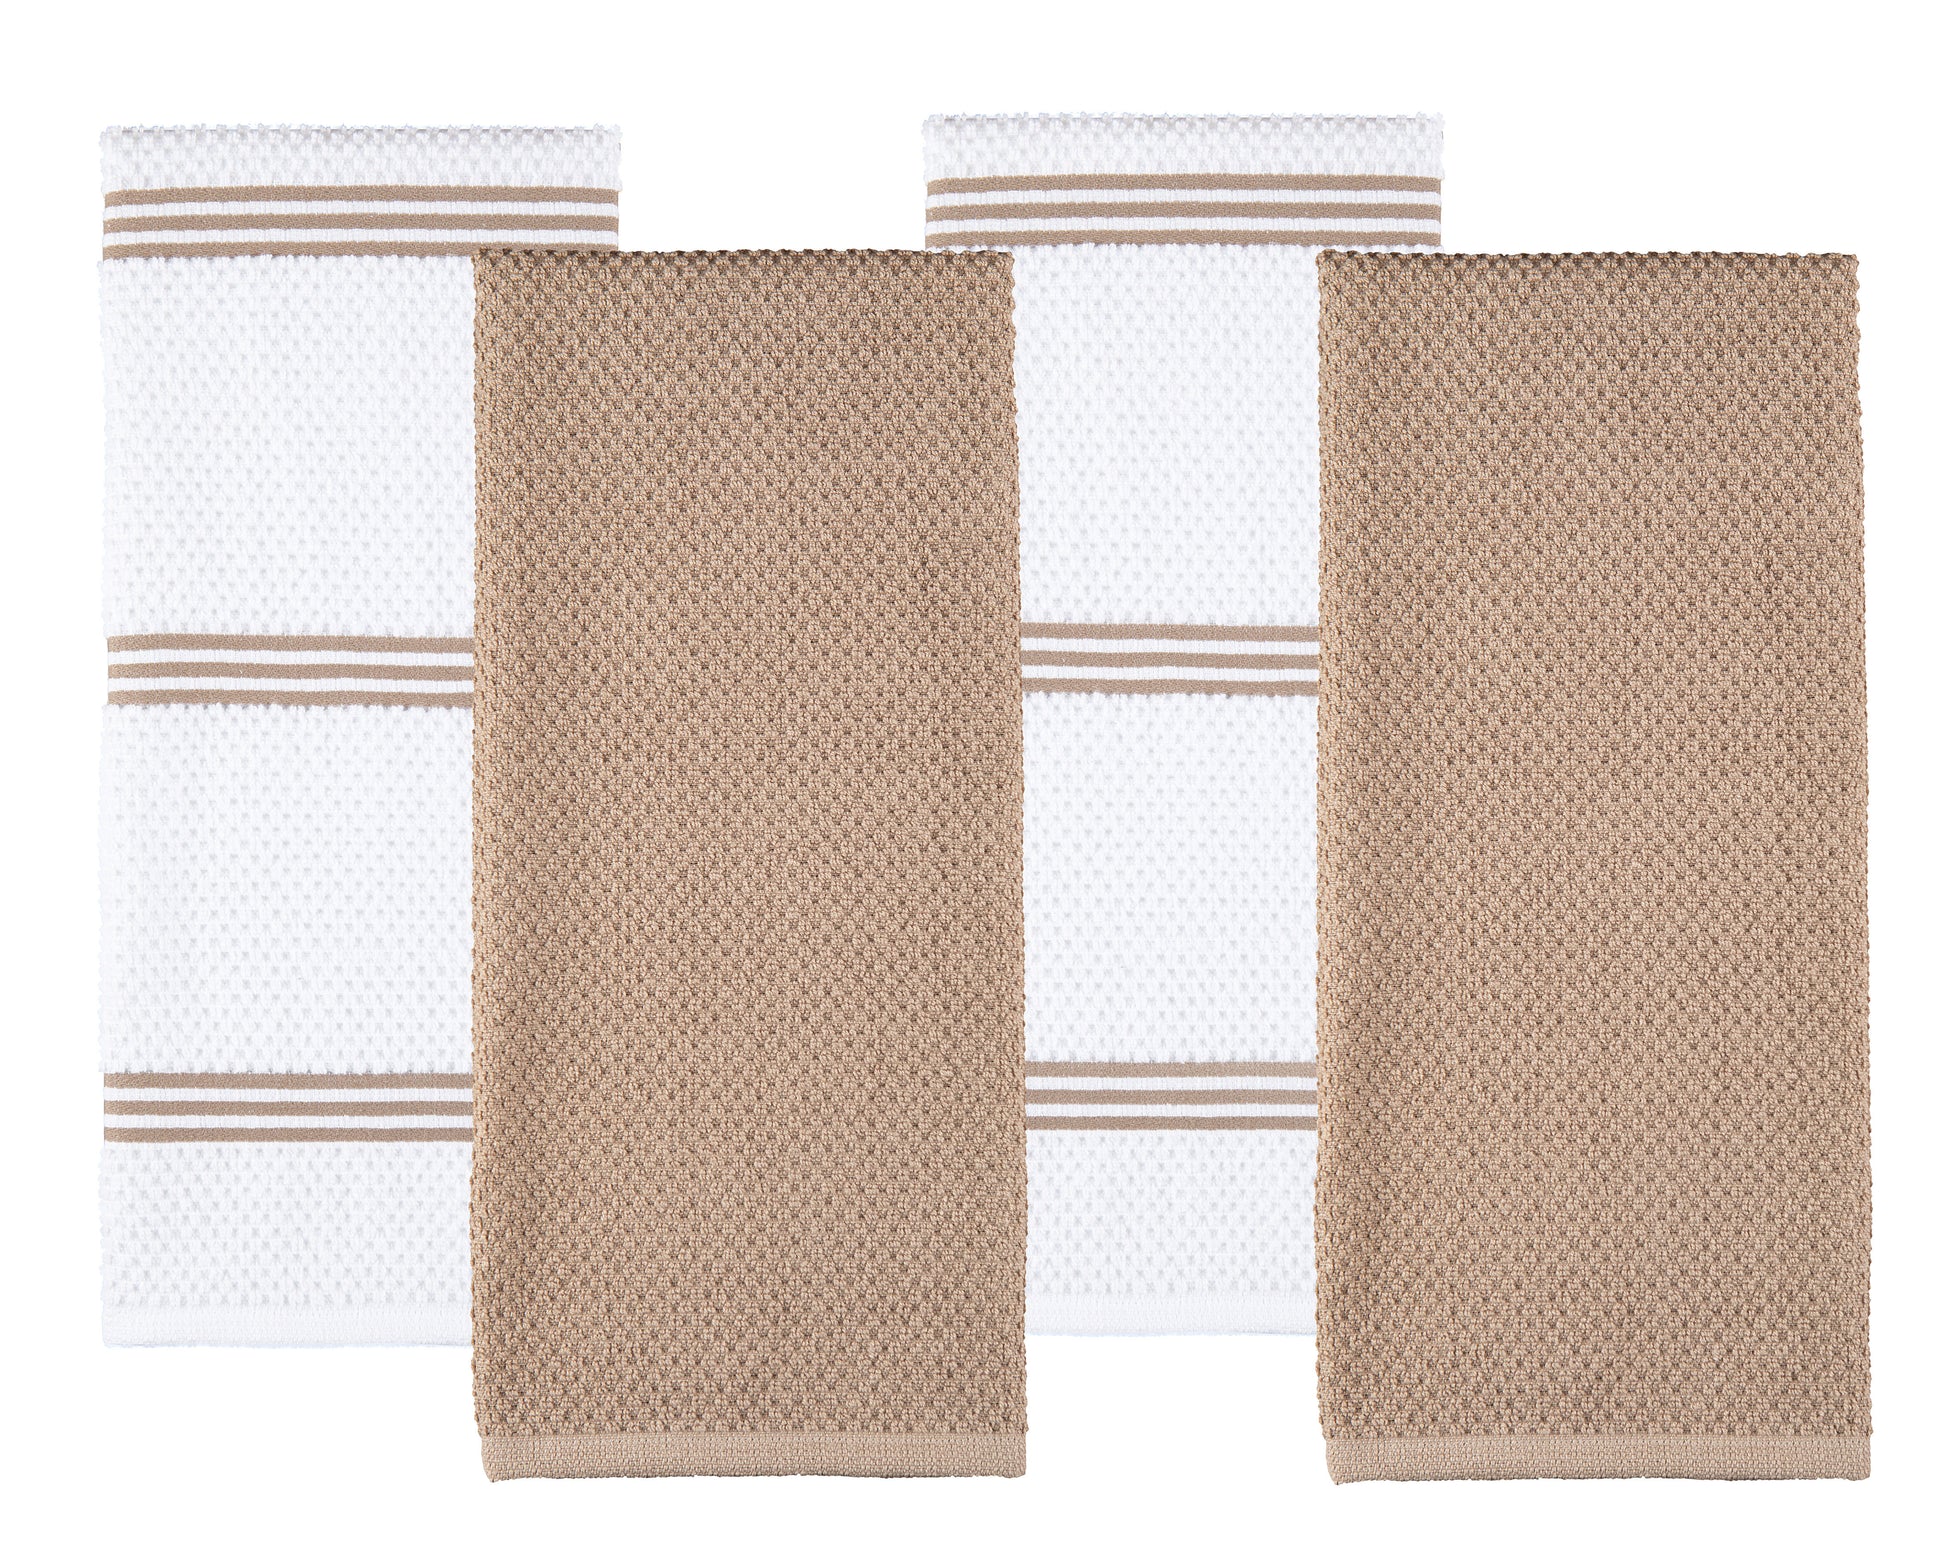 Sticky Toffee Mixed Pack Kitchen Dish Towels, Flat, Terry, Waffle and Herringbone, 4 Pack, 28 in x 16 in, Tan, Size: 16 x 28, Beige